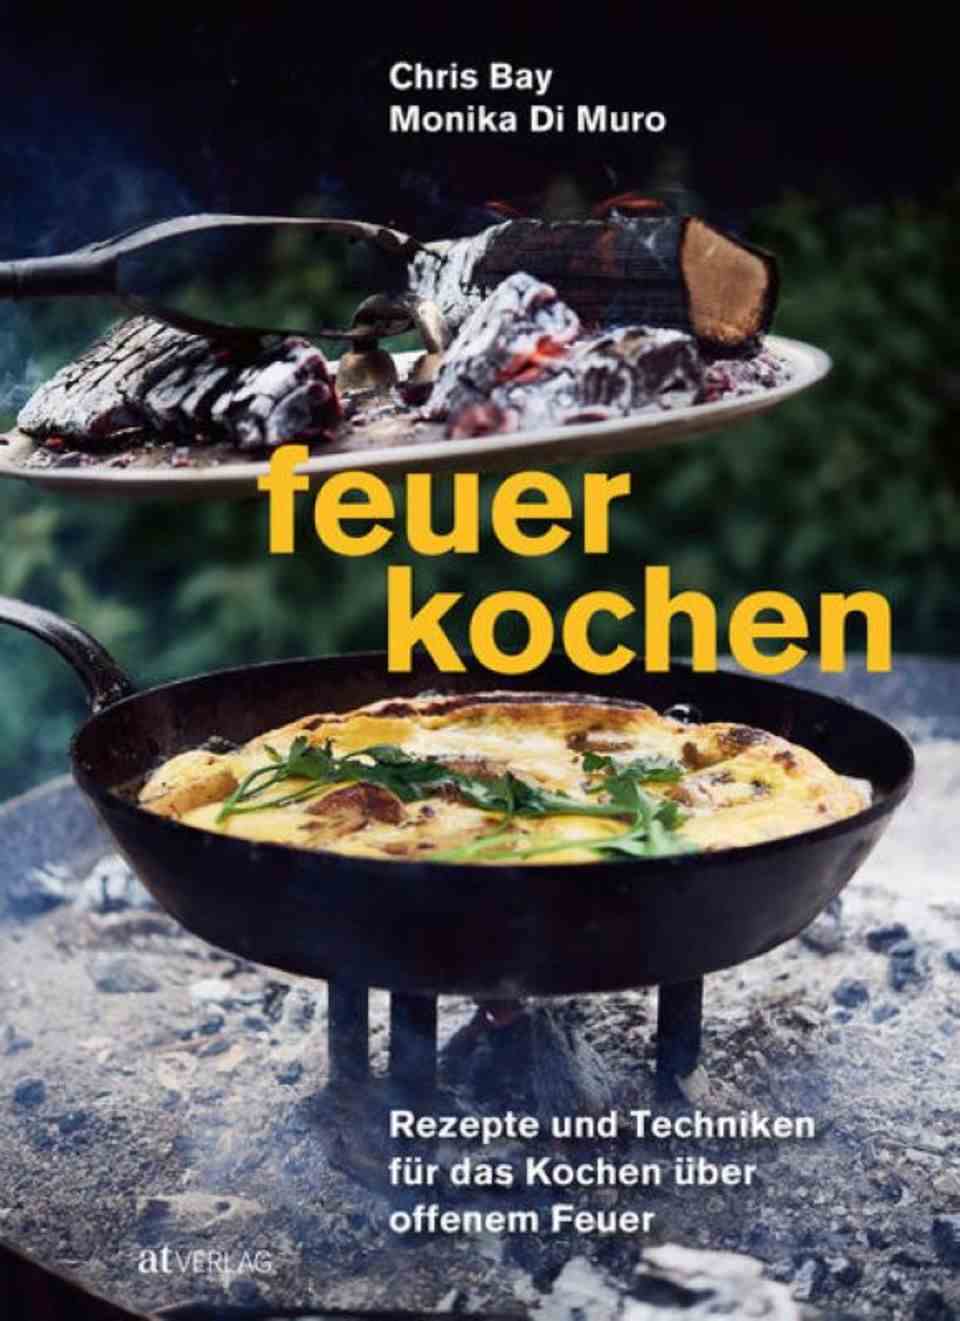 Read everything you want to know about fire cooking here: Fire cooking by Monika di Muro and Chris Bay, AT Verlag.  304 pages.  44 euros.